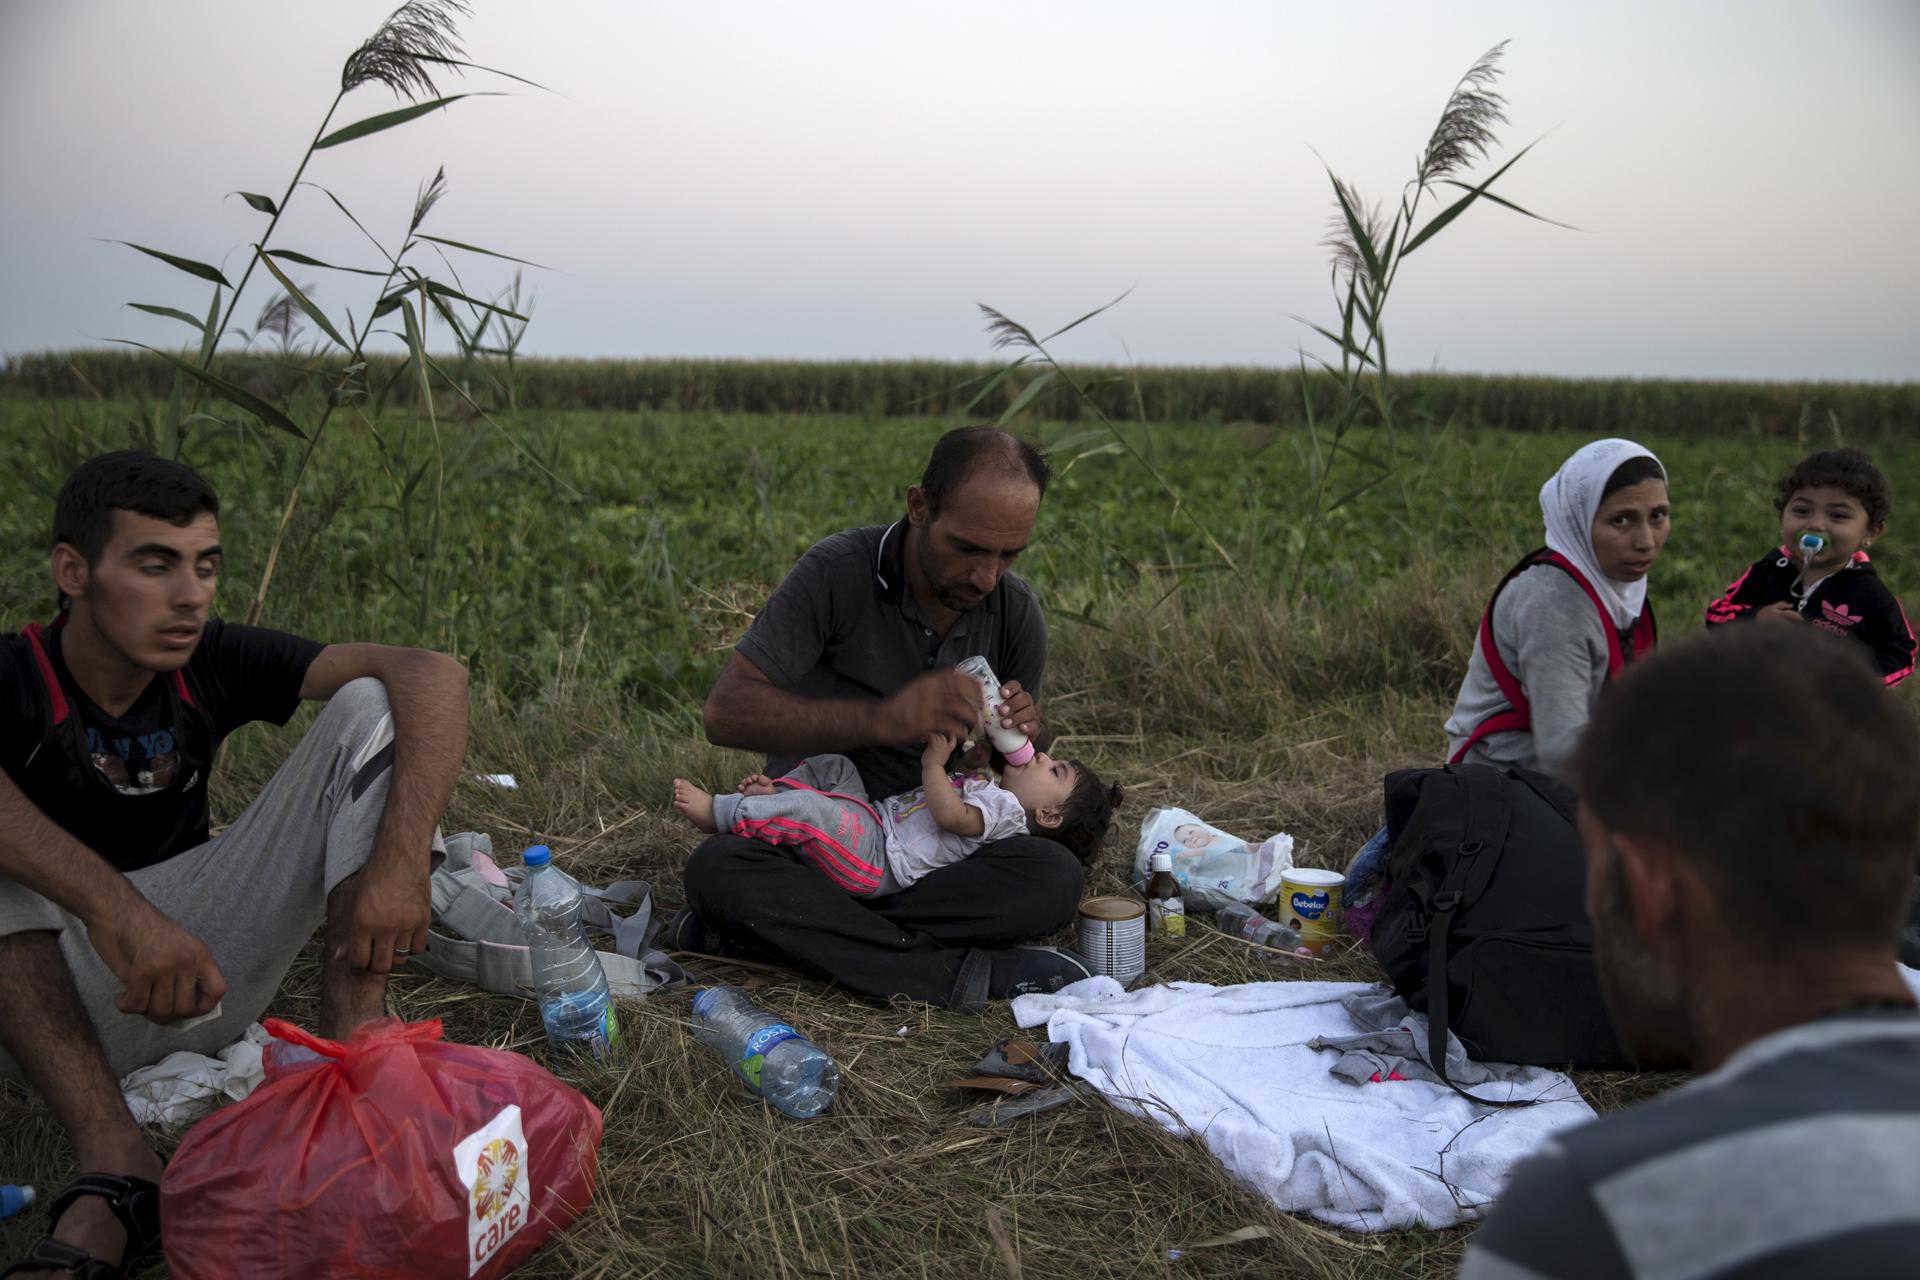 A migrant, hoping to cross into Hungary, feeds a child with milk as they sit on a field outside the village of Horgos in Serbia, towards the shared border with Hungary.